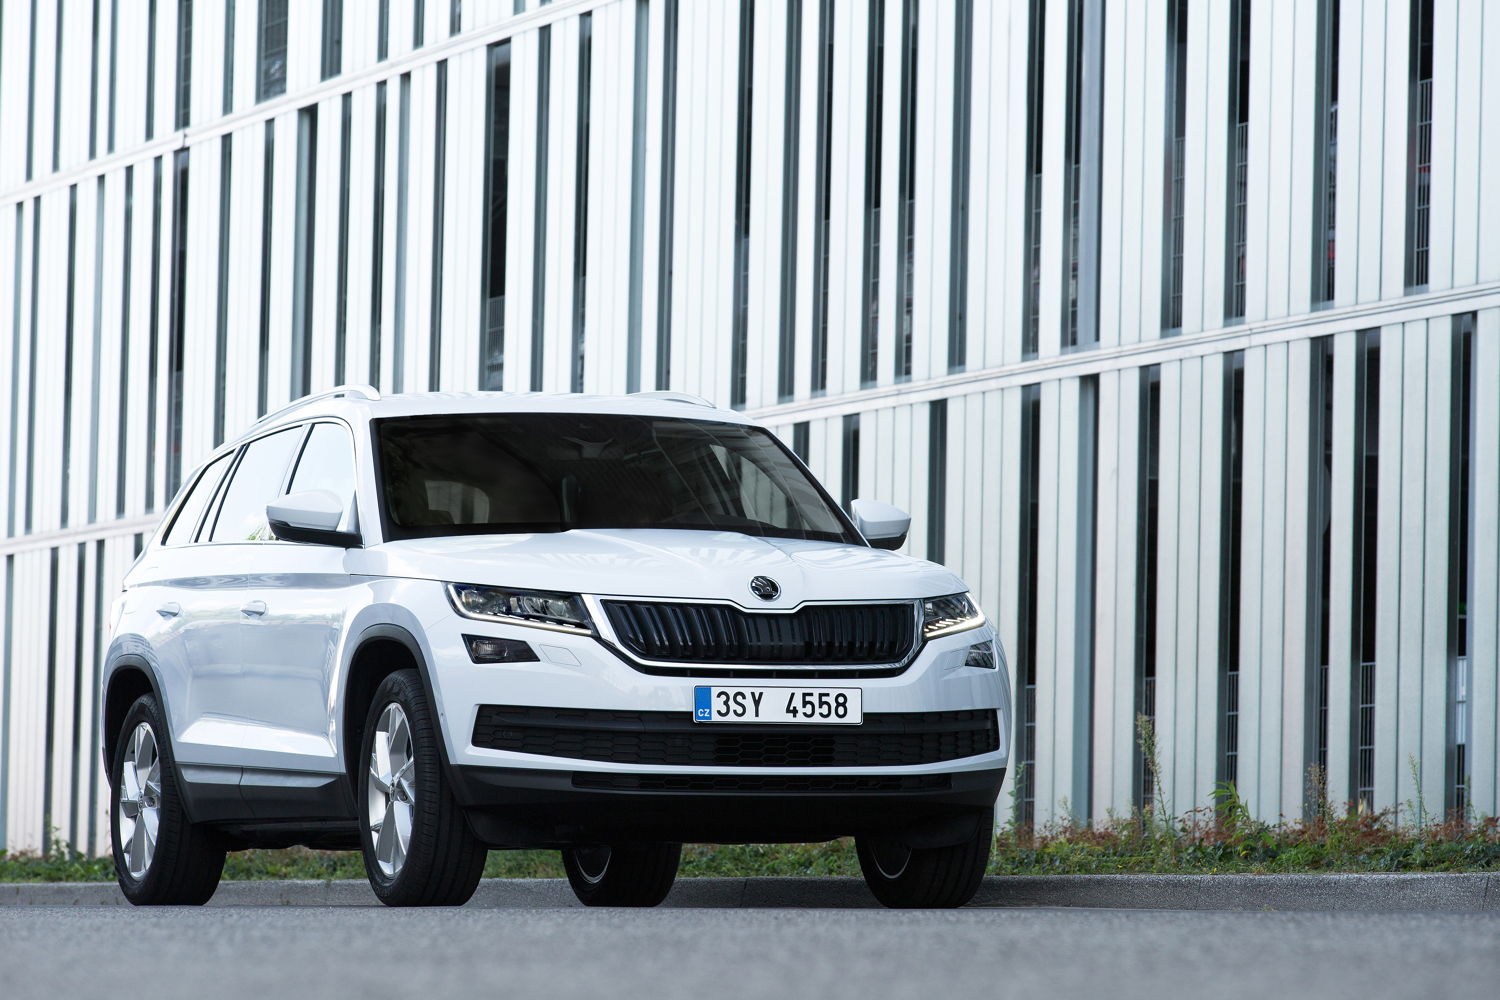 The drivers of the growth are the brand’s flagship, the ŠKODA SUPERB, and the KODIAQ SUV, launched at the beginning of the year.